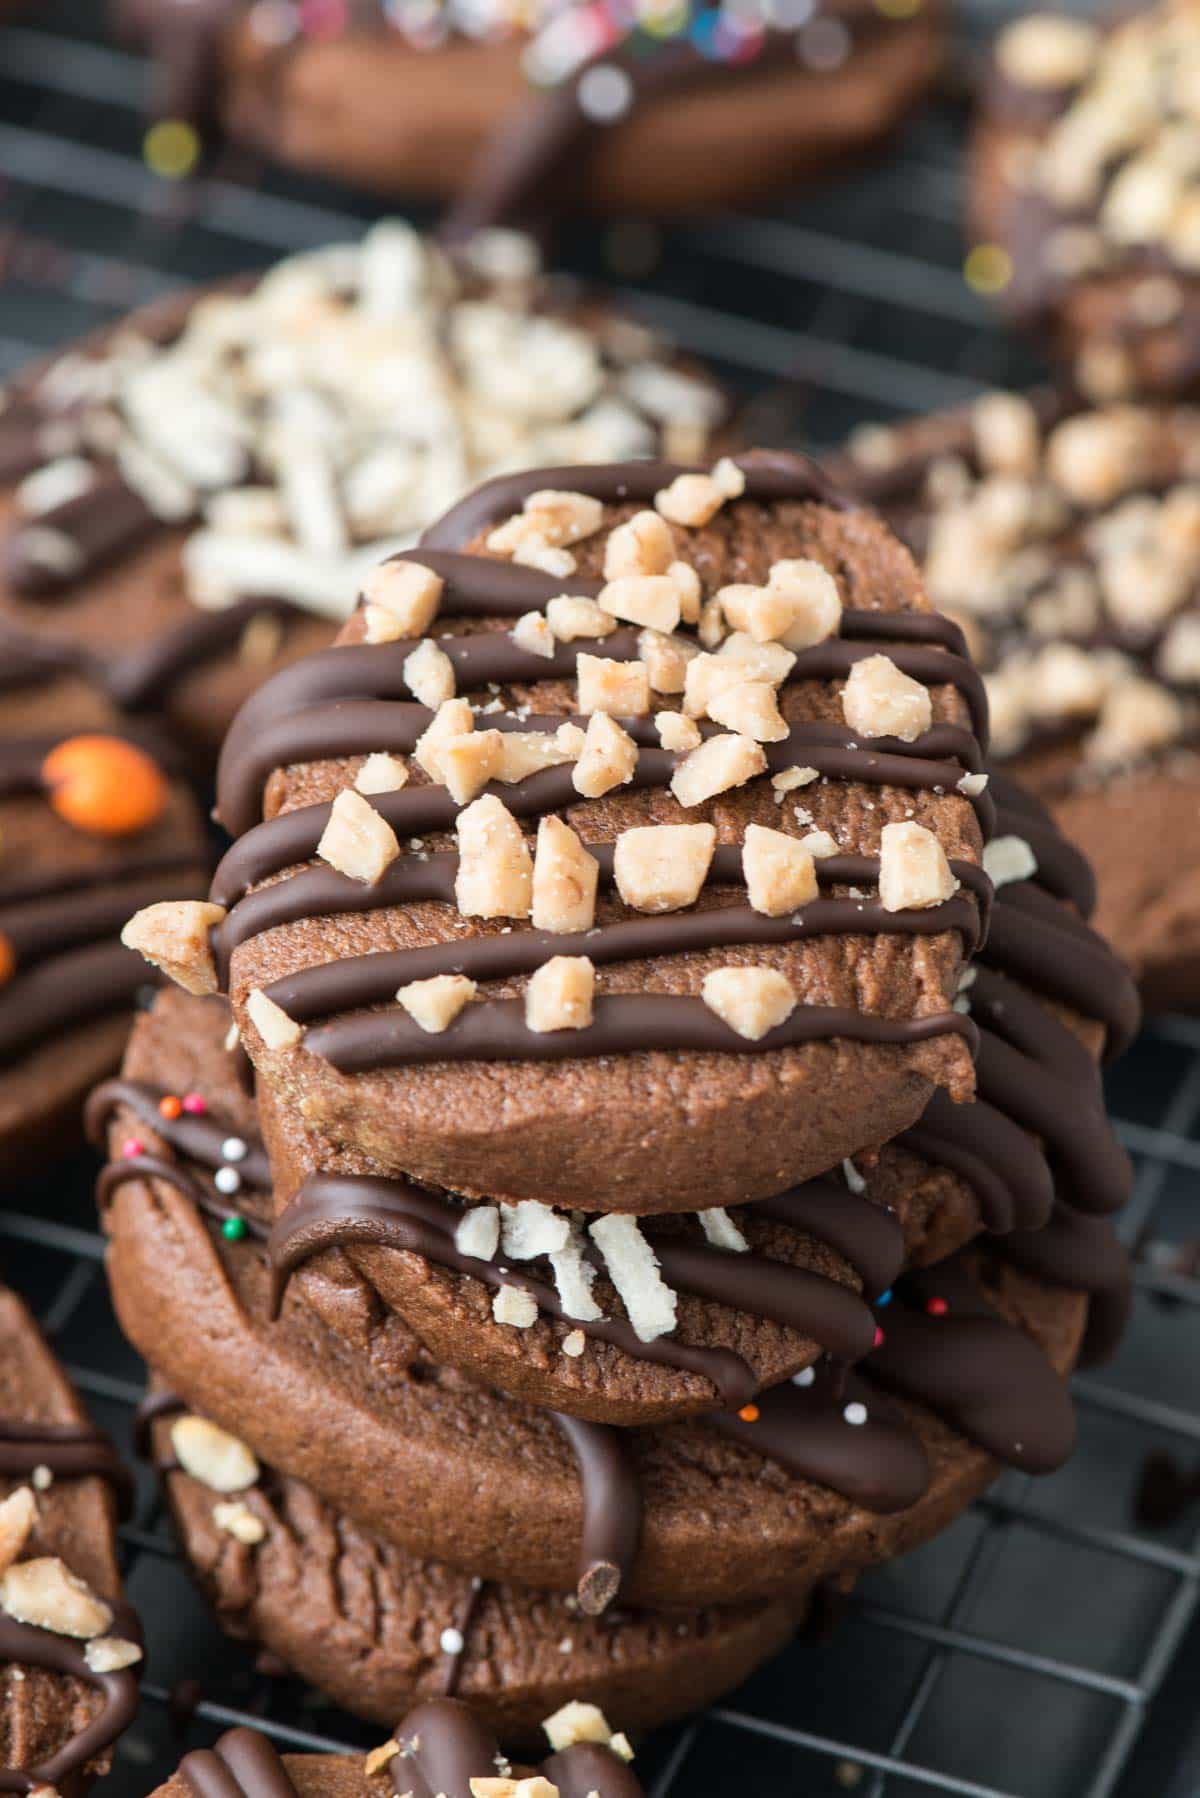 Slice and Bake Chocolate Peanut Butter Cookies